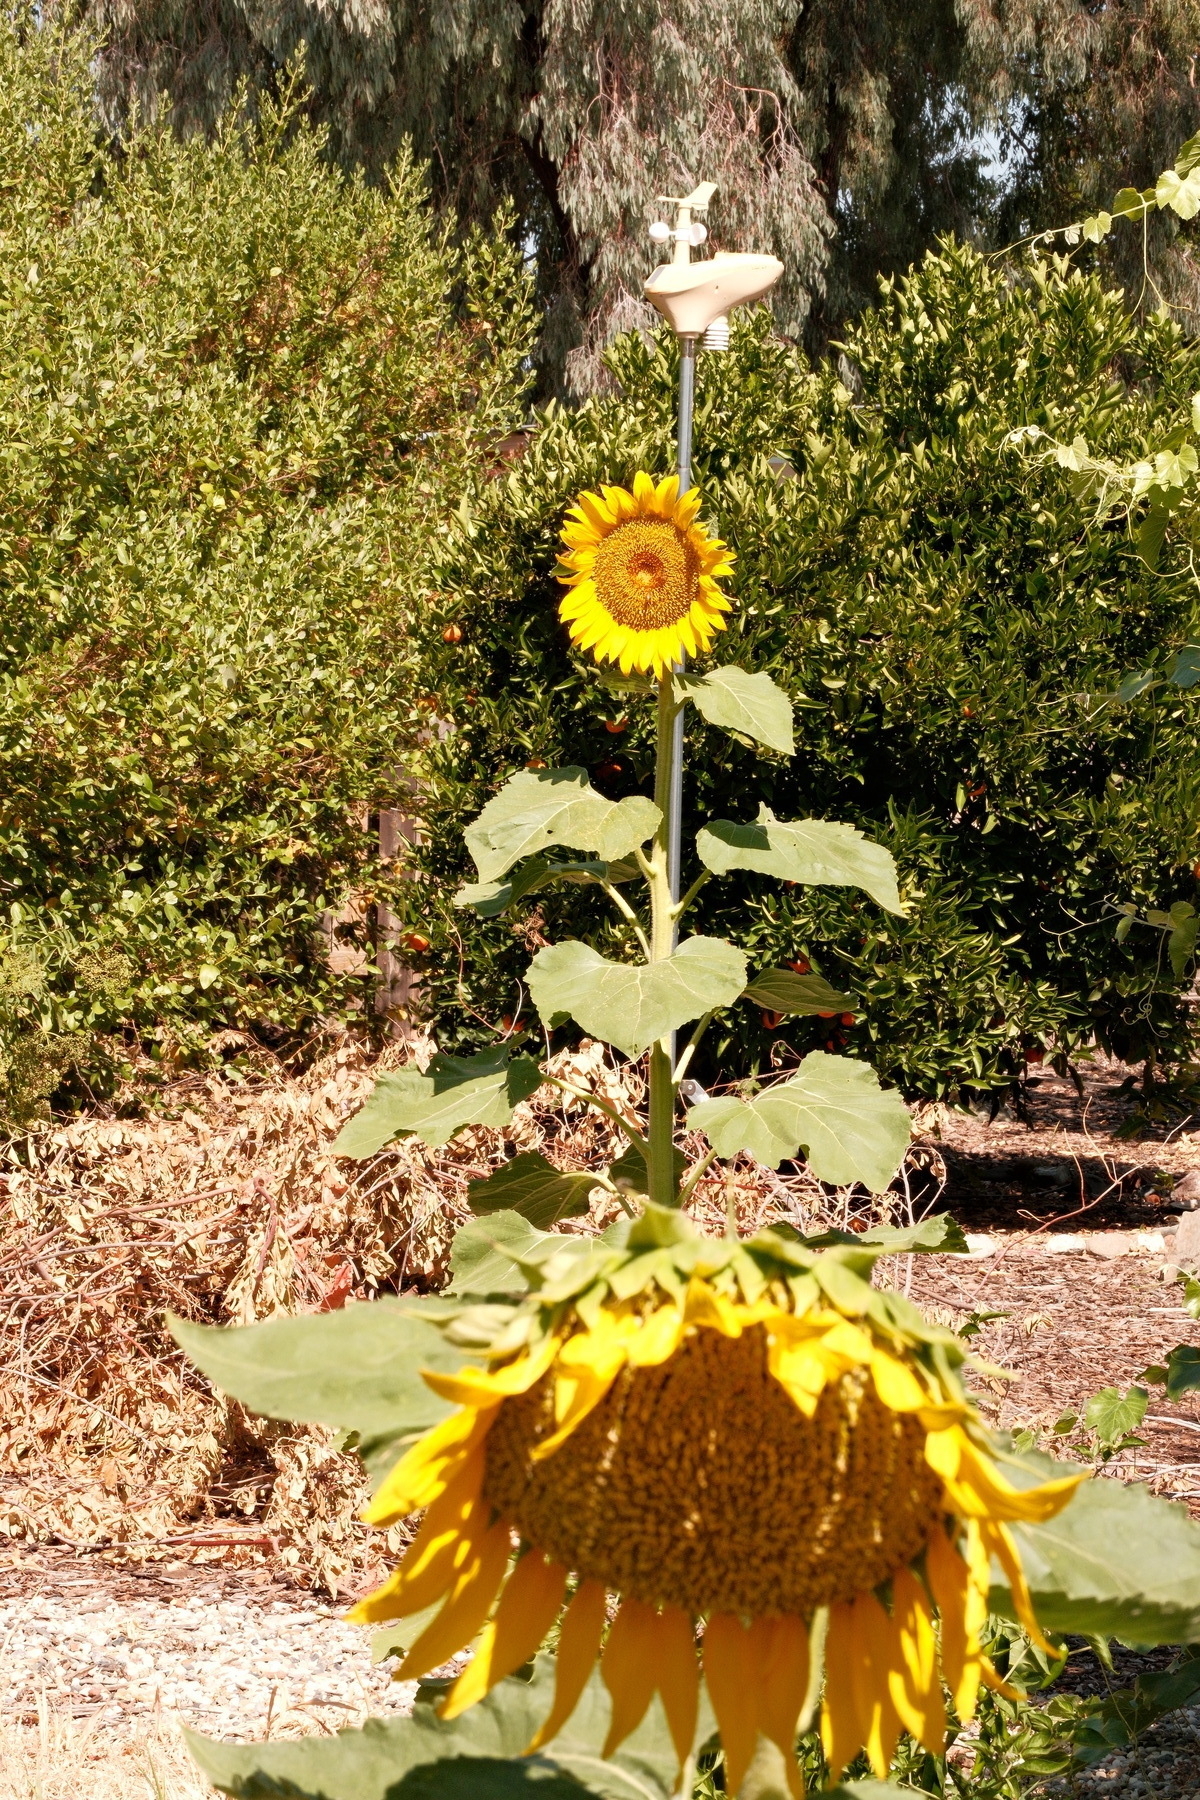 Two sun flowers, one at the bottom and nearby and one about 15 feet away. There’s vegetation surrounding the flowers and a weather station behind the forest Sunflower. The flowers are extremely yellow and well lit.